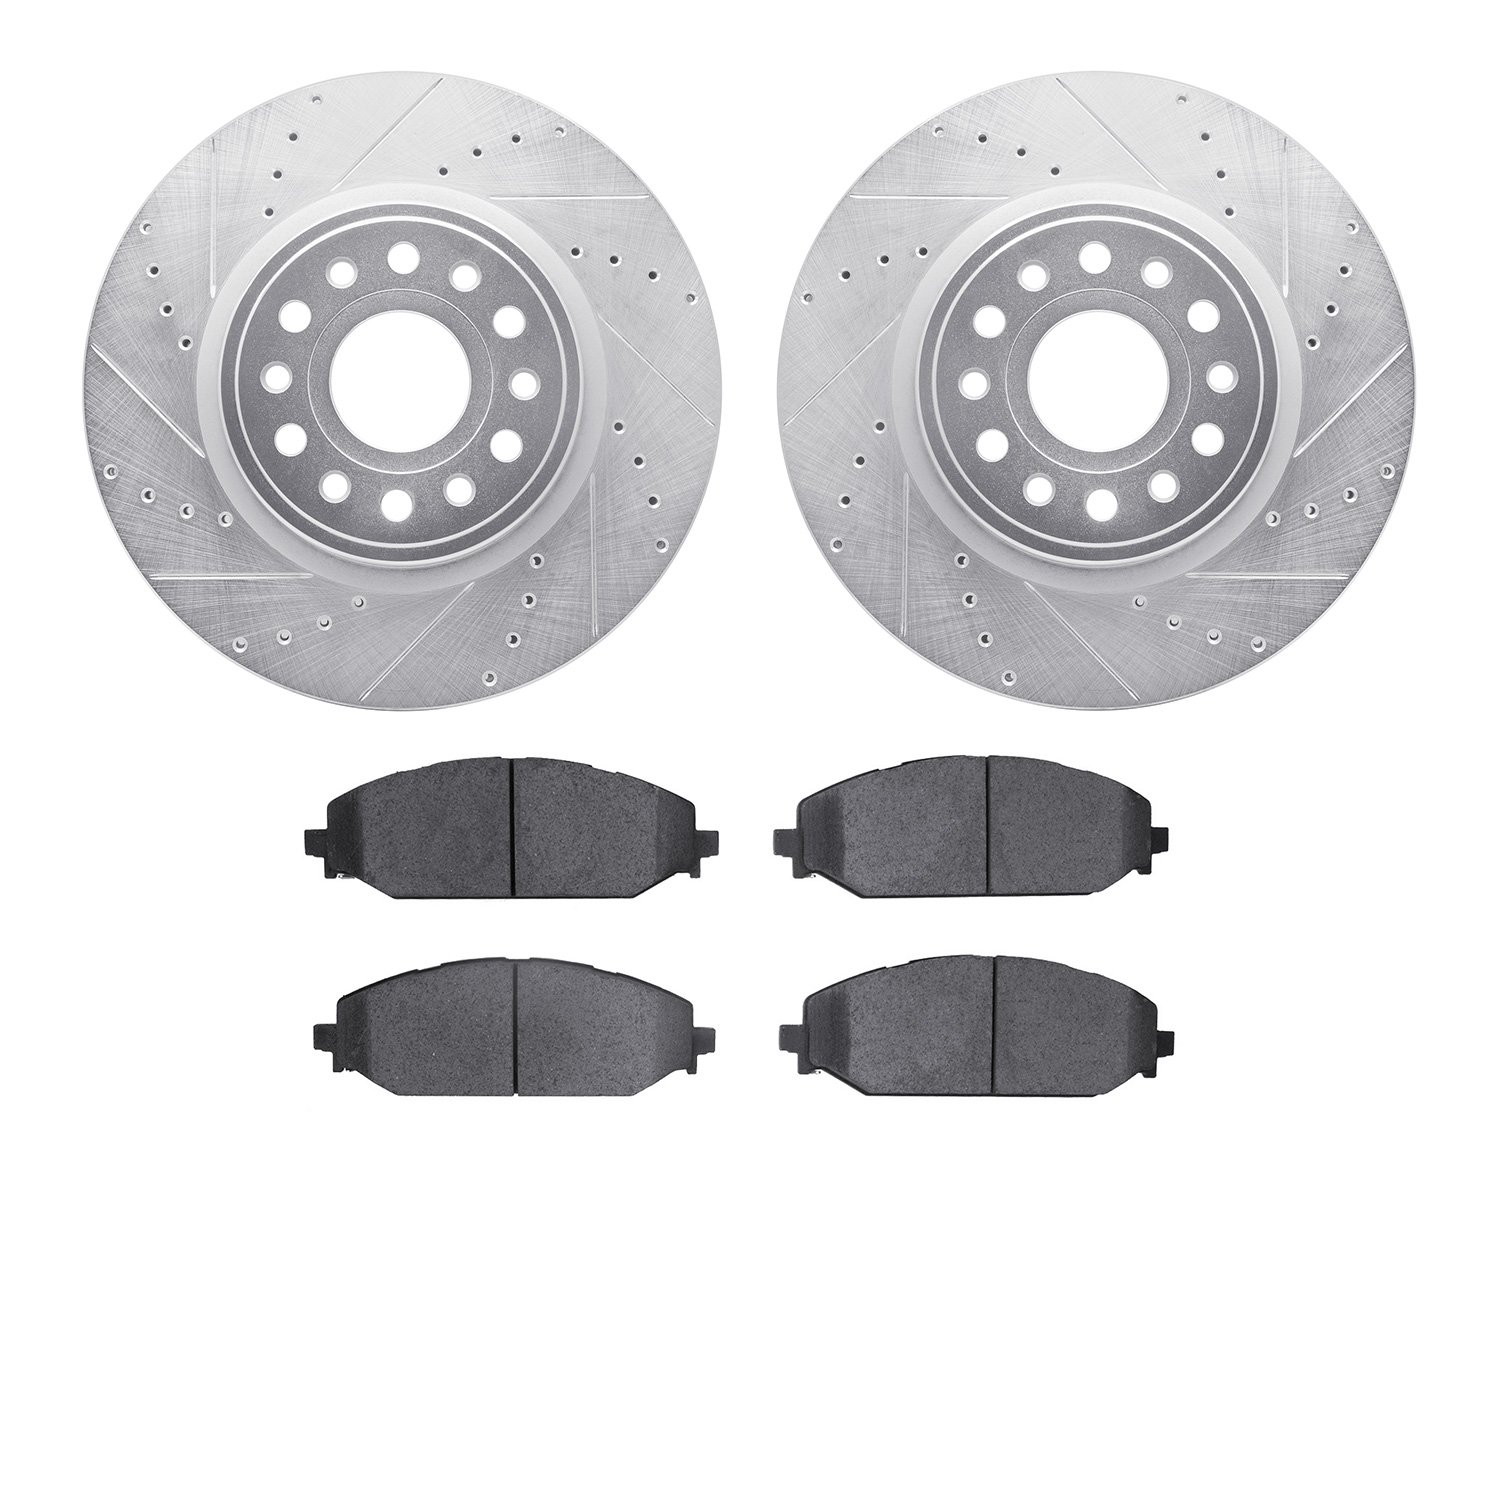 7402-40026 Drilled/Slotted Brake Rotors with Ultimate-Duty Brake Pads Kit [Silver], Fits Select Mopar, Position: Front